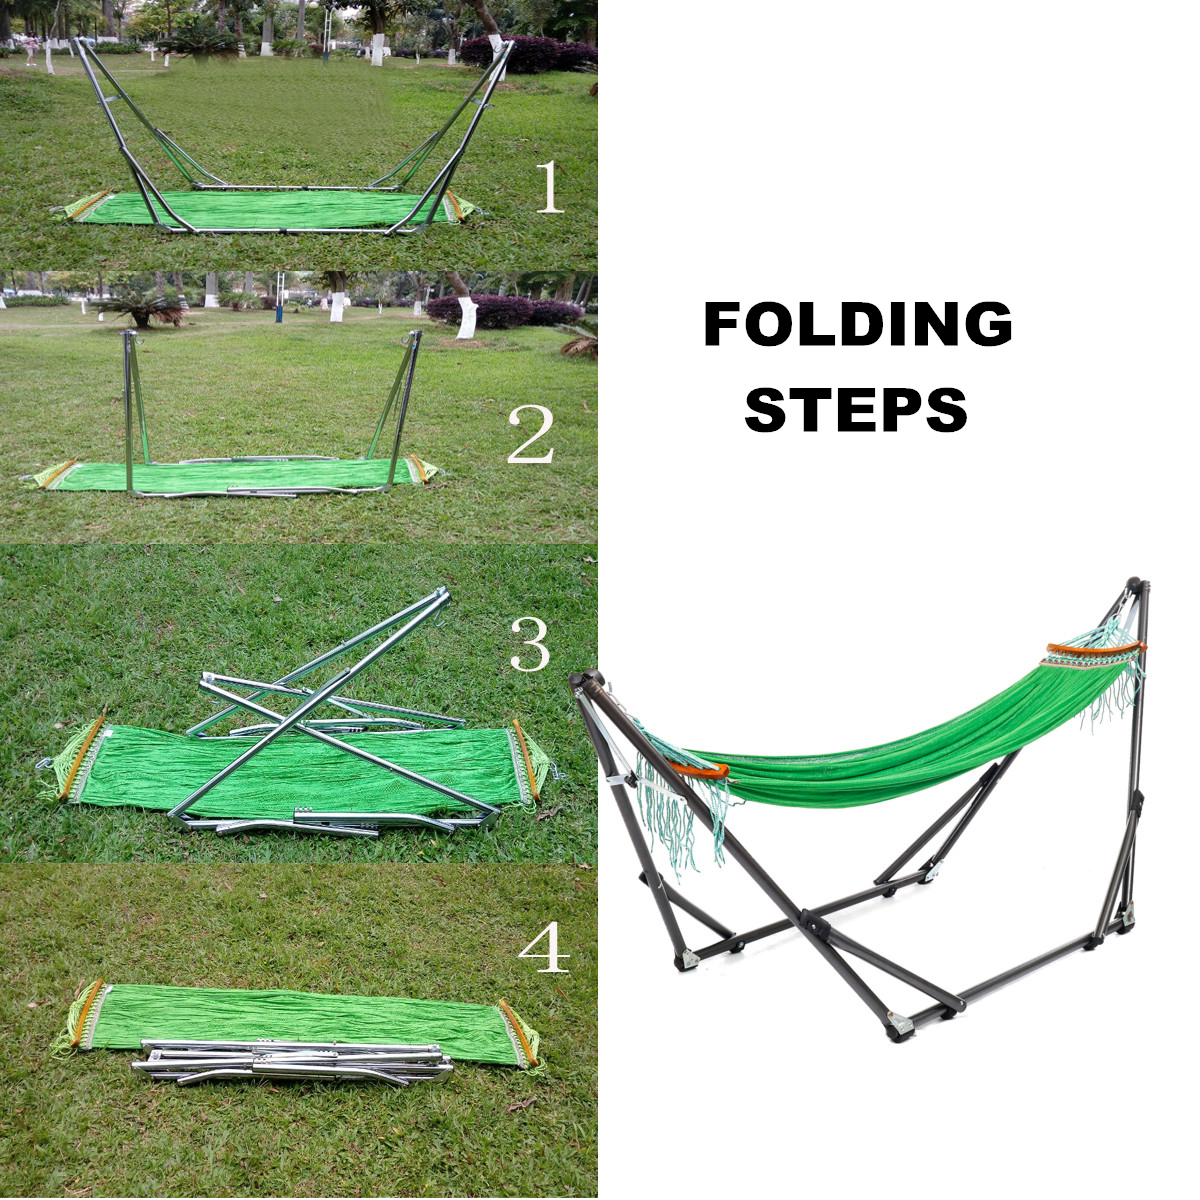 Portable Canvas Hammock Stand Portable Multifunctional Practical Outdoor Garden Swing Hammock Single Hanging Chair Bed Leisure Camping Travel 4